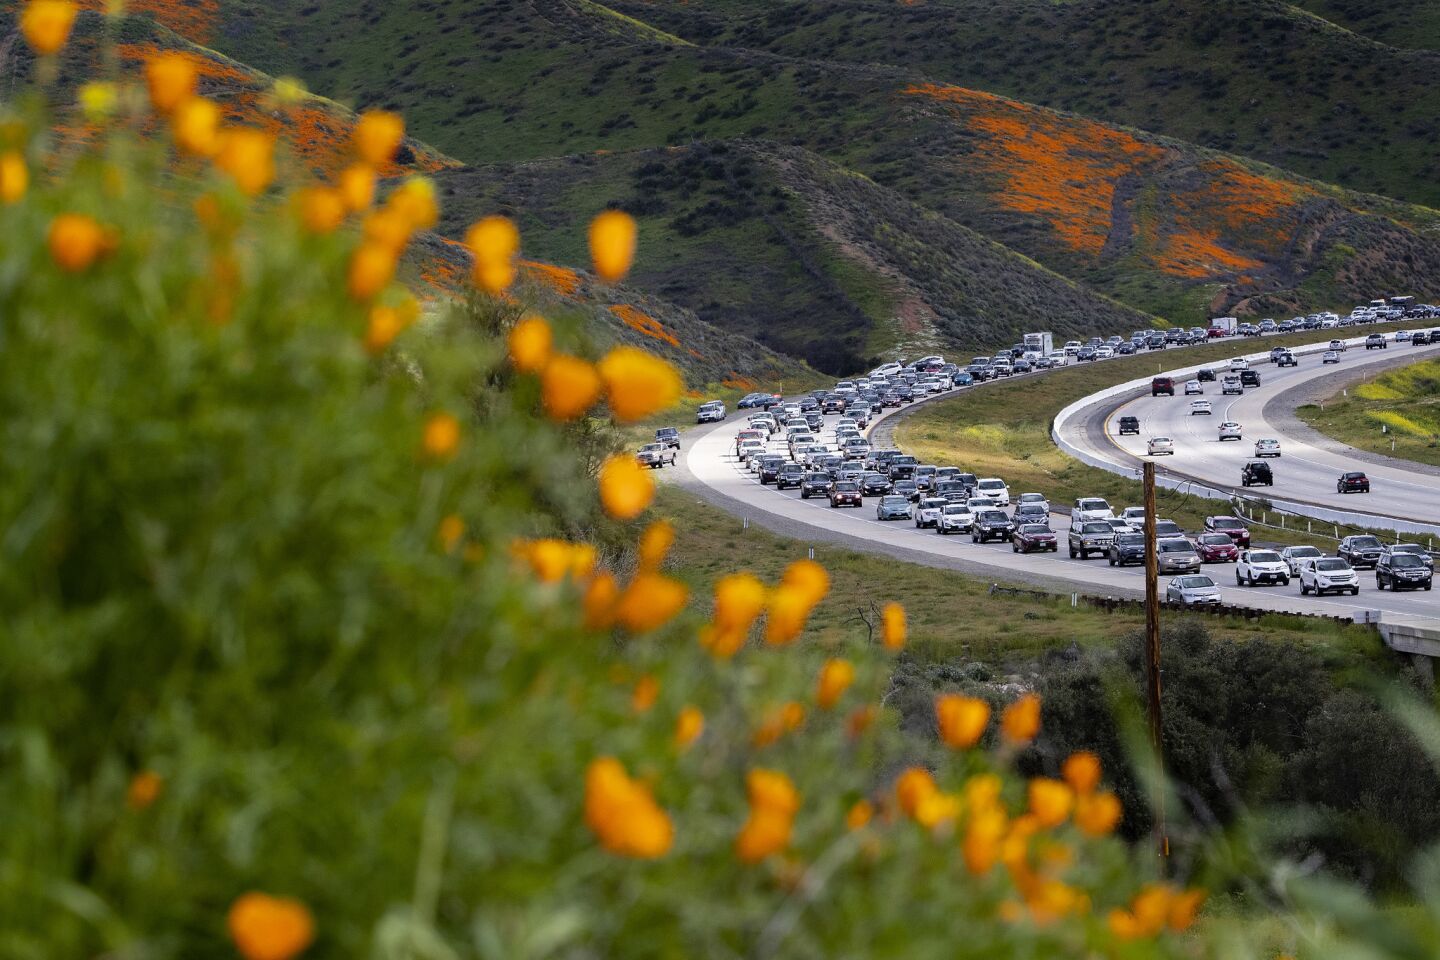 The super bloom creates a super traffic jam of wildflower enthusiasts along the 15 Freeway in Lake Elsinore.